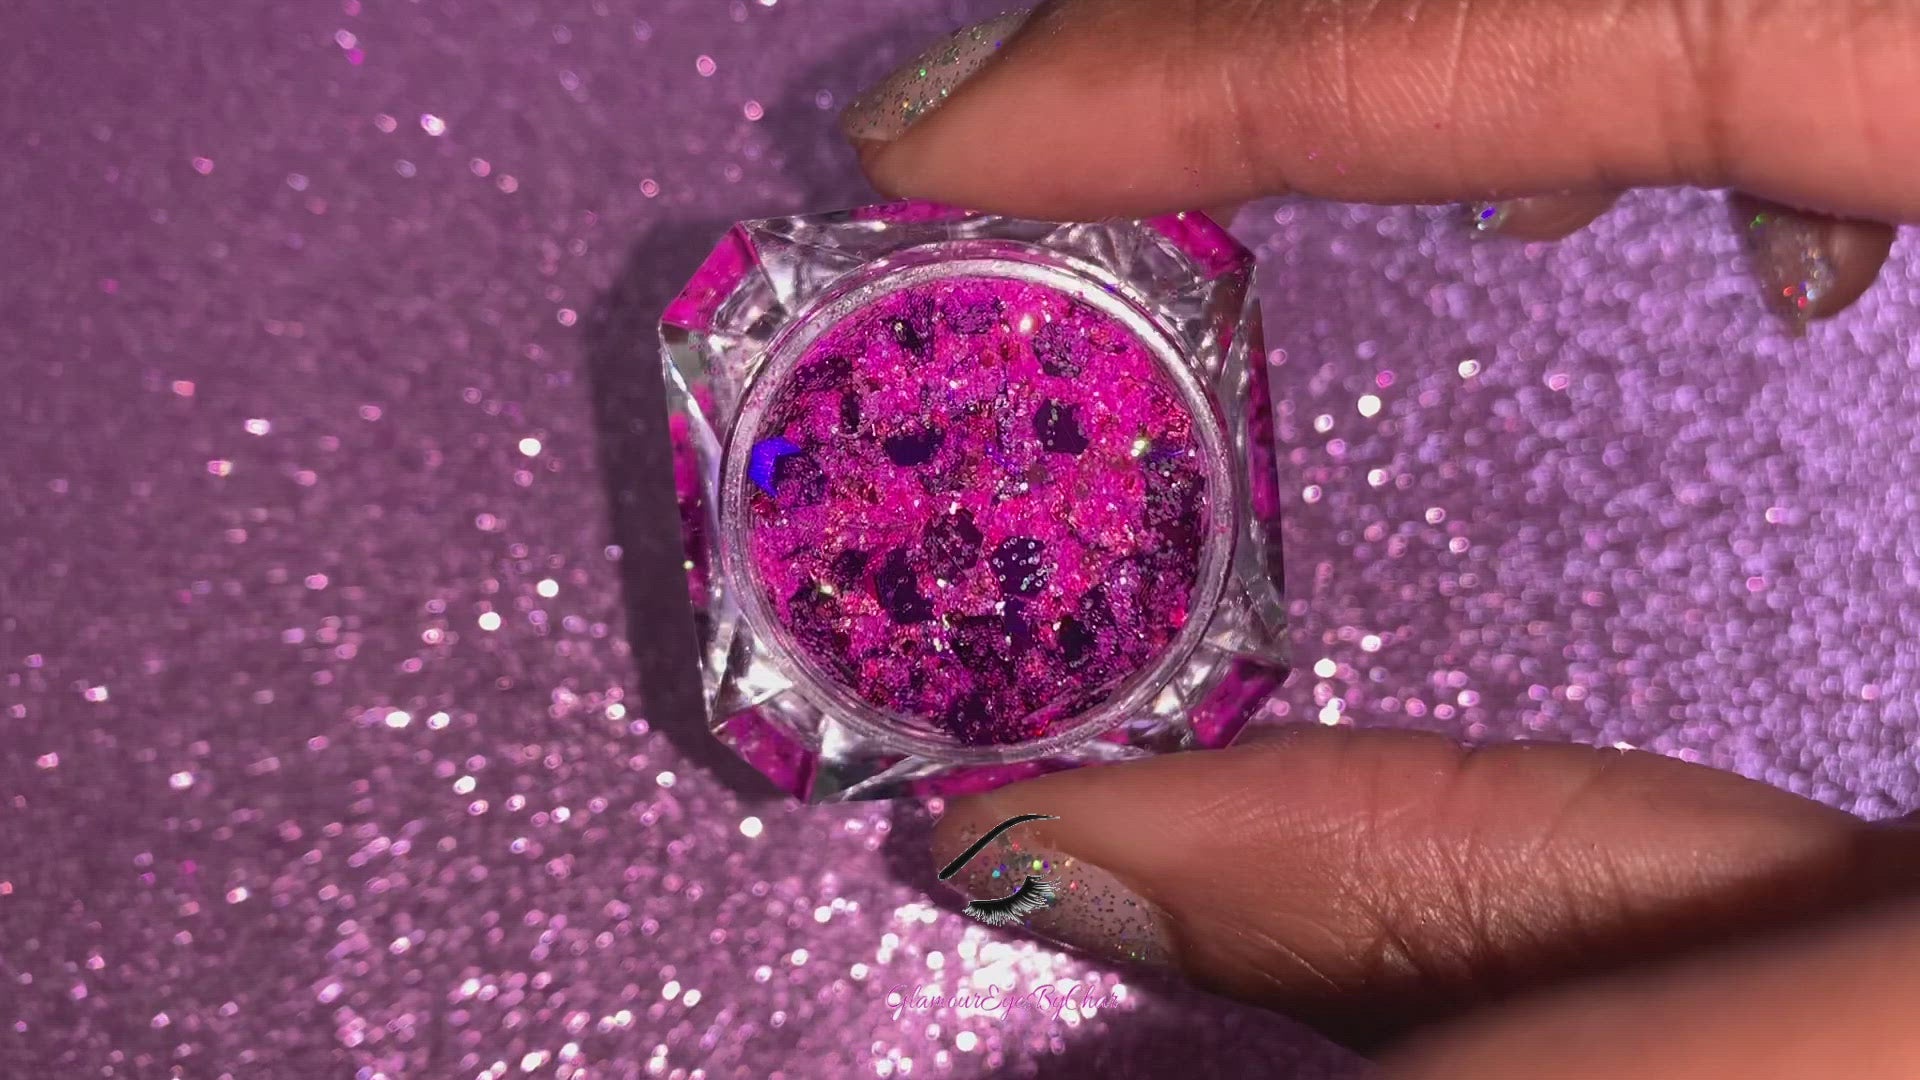 This glitter is called Pink Mayhem and is part of the super chunky glitter collection. It consists of iridescent bright pink and purple glitter with a dazzling sparkle. Pink Mayhem can be used for your face, body, hair and nails. Comes in 5g and 10g jars. ﻿Note: 10g jars are round and not diamond shaped.  **Glitter will be discontinued once sold out**